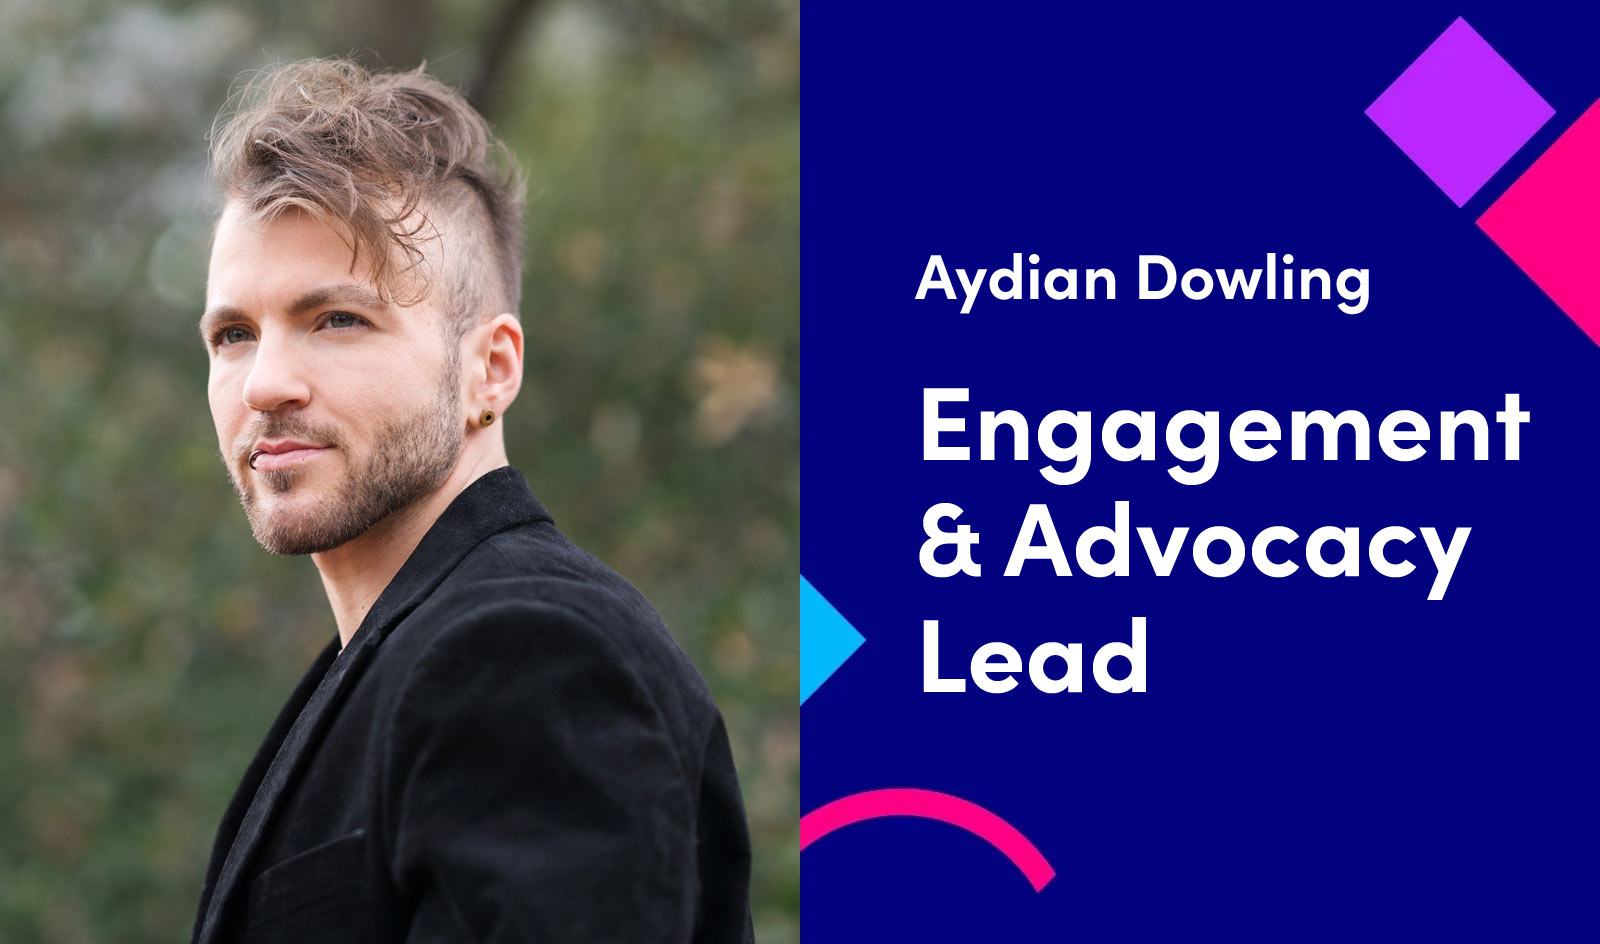 Aydian Dowling, Engagement and Advocacy Lead